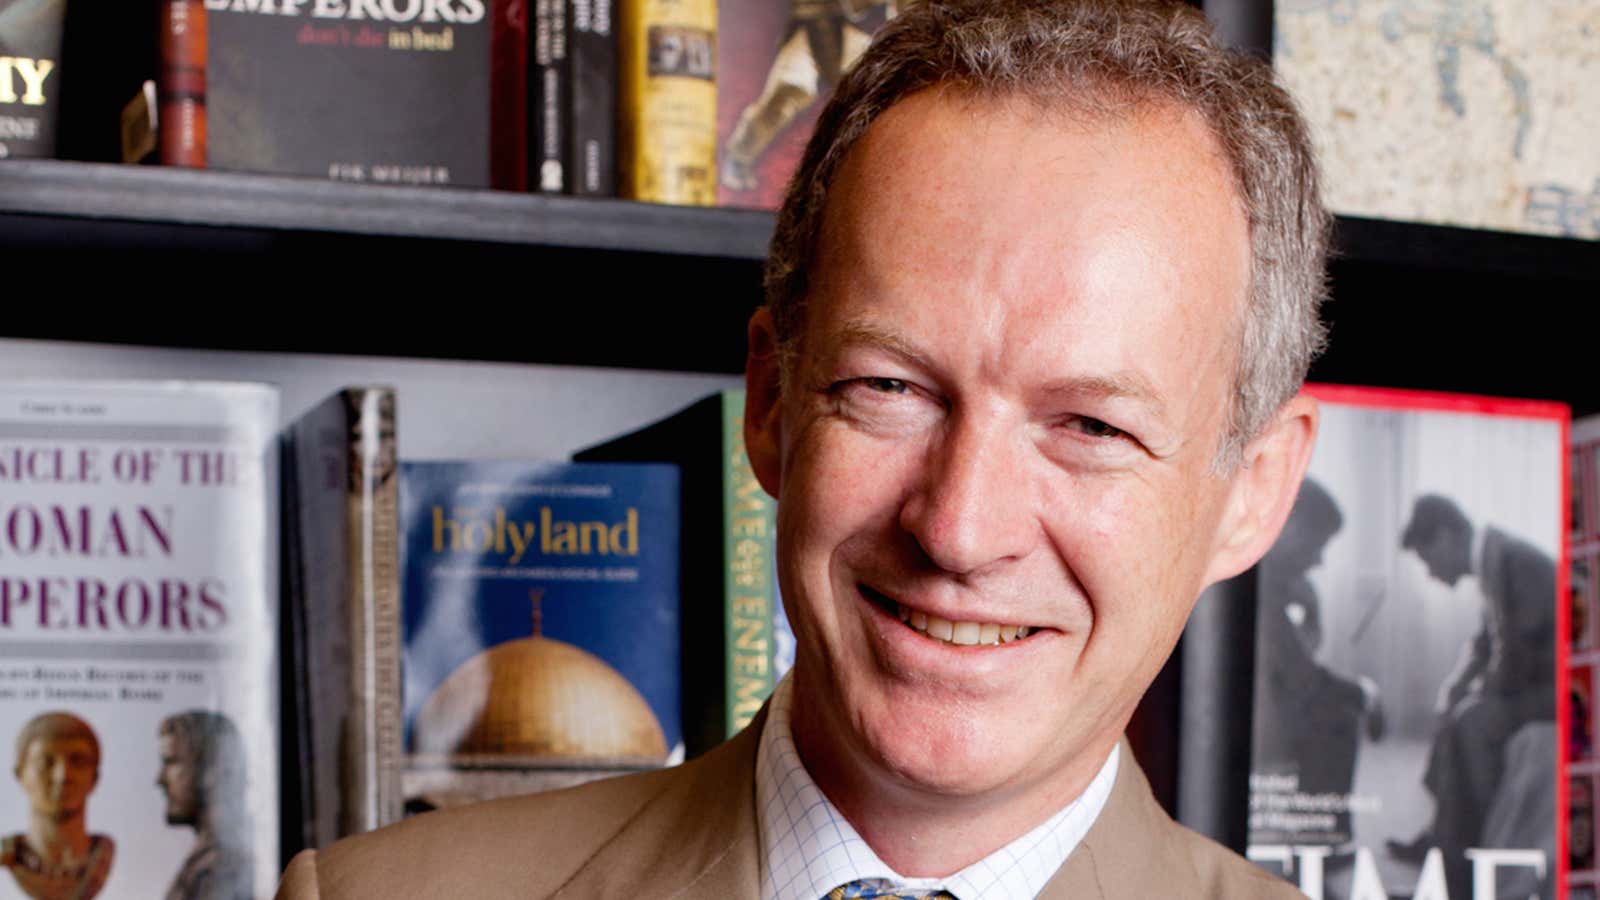 James Daunt who runs Waterstones – he has been hired by new owner Alexander Mamut.